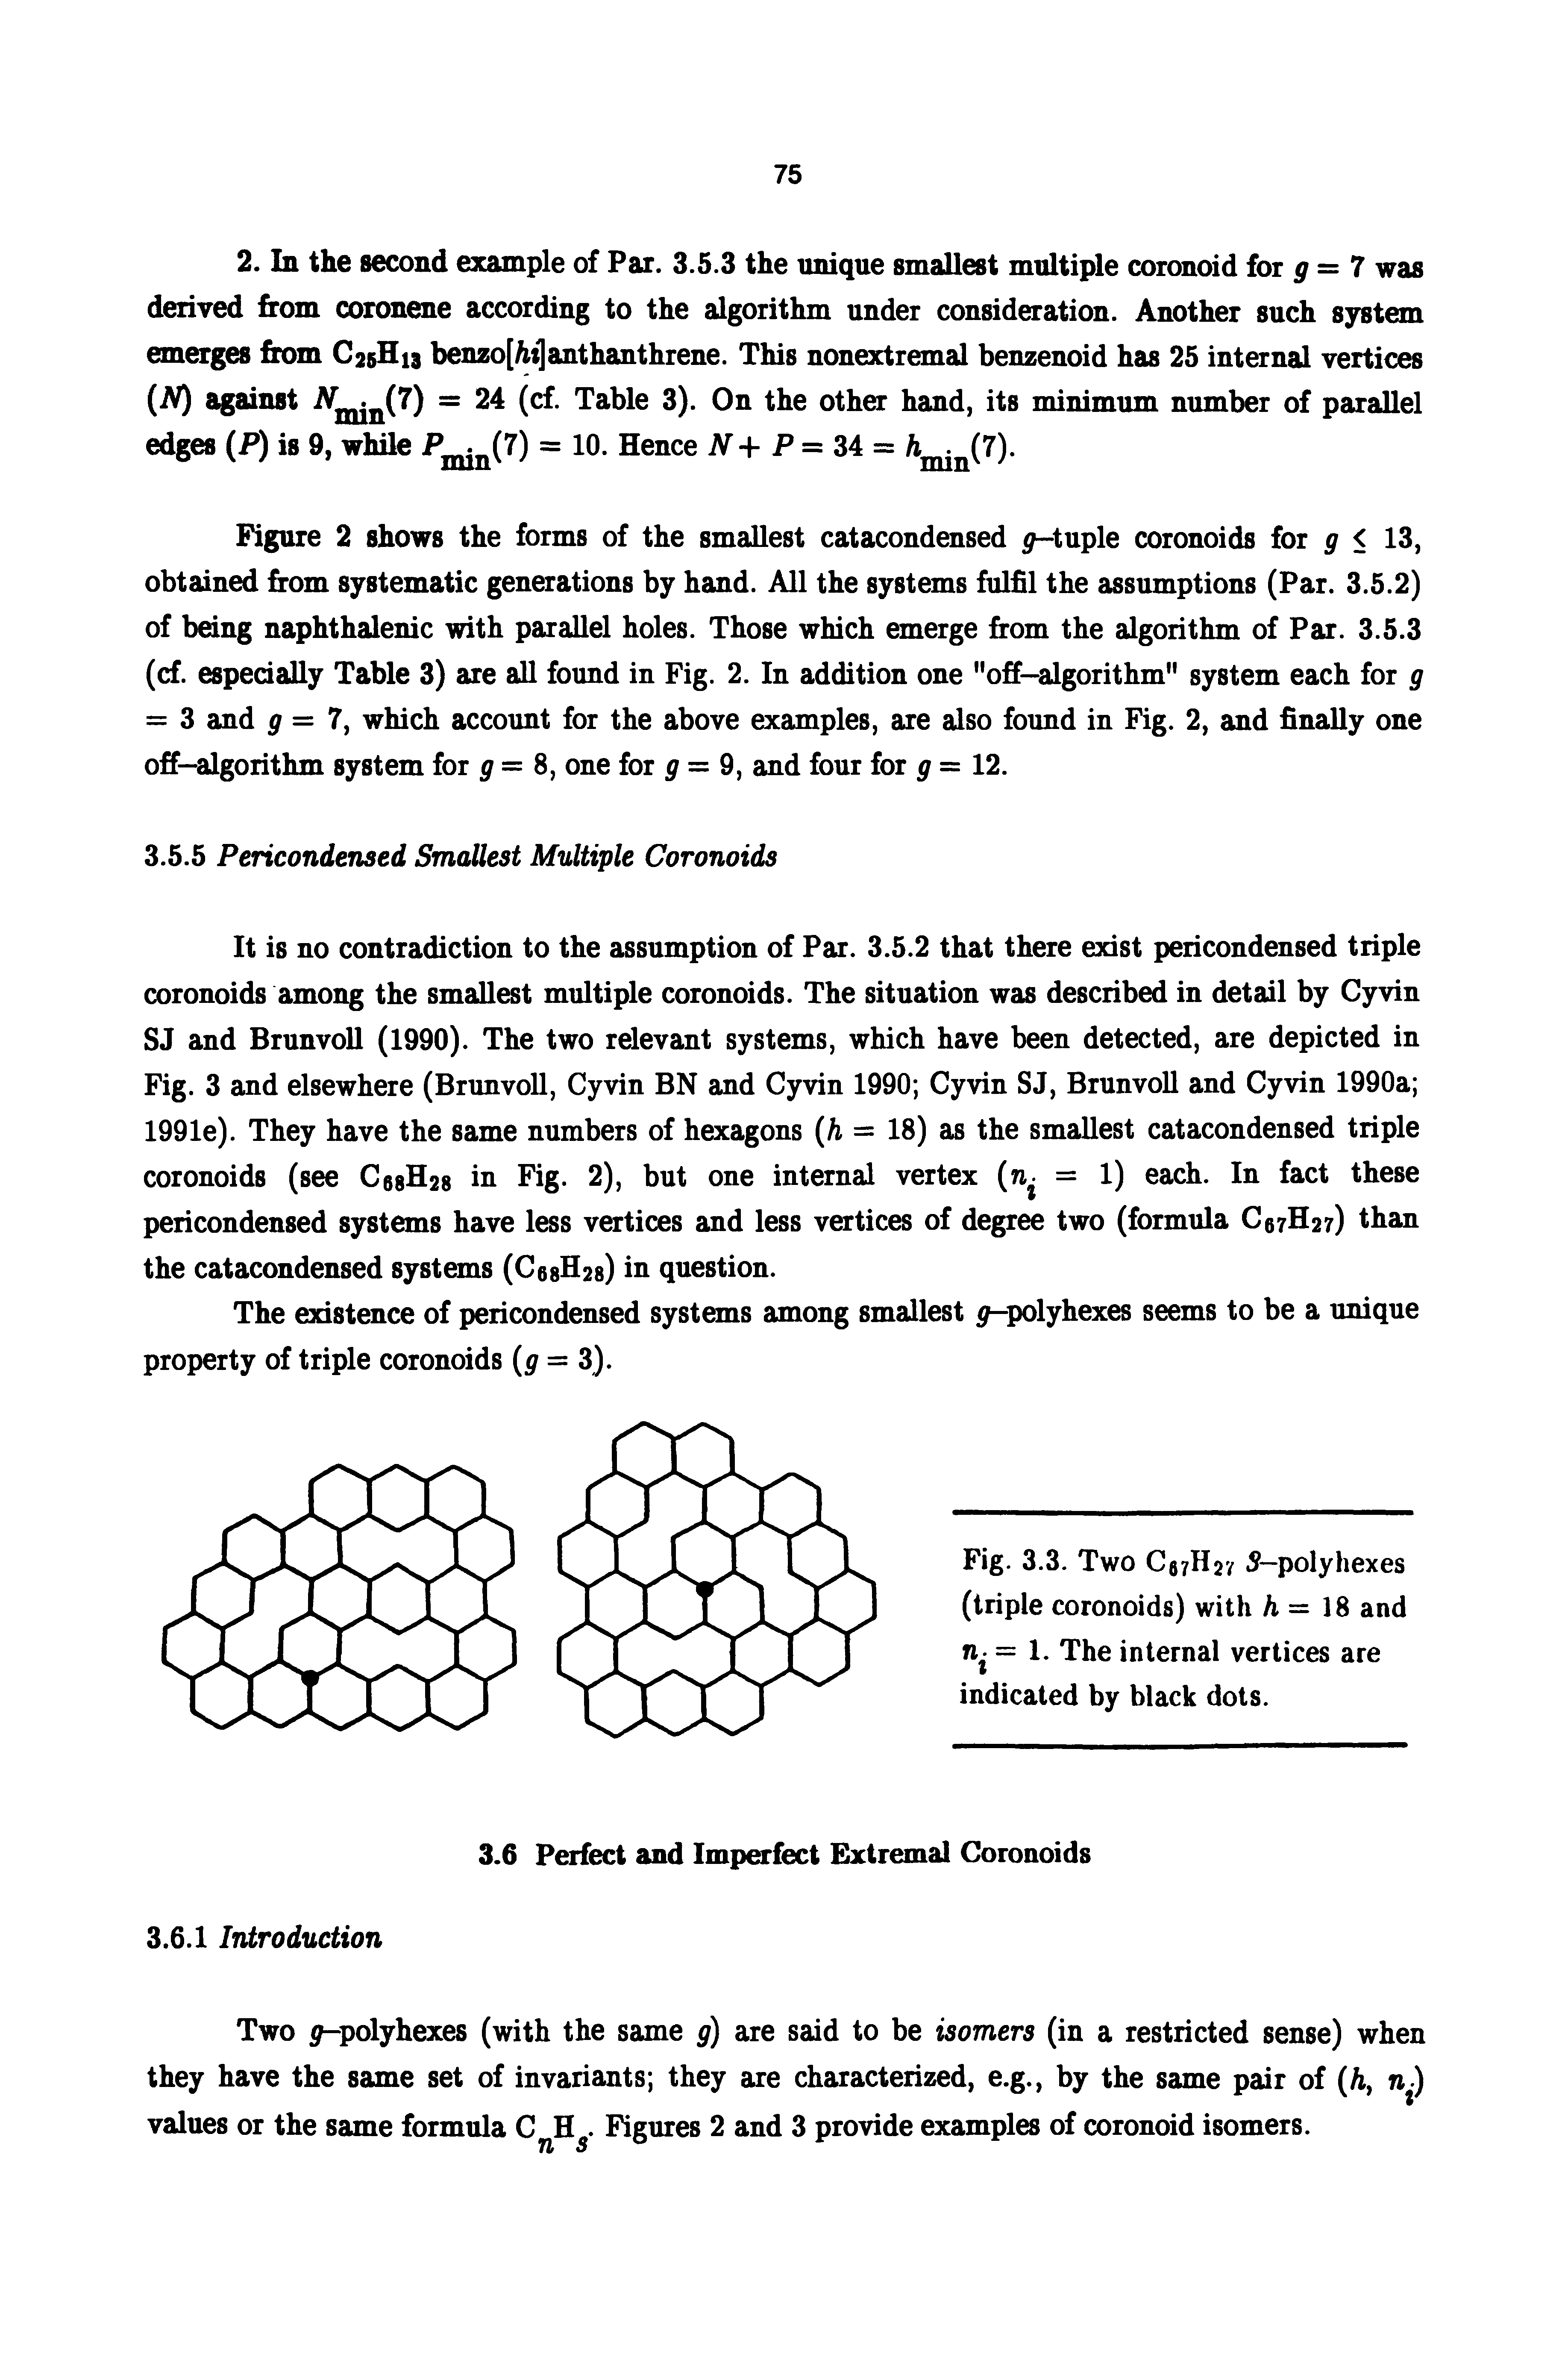 Figure 2 shows the forms of the smallest catacondensed tuple coronoids for g < 13, obtained from systematic generations by hand. All the systems fulfil the assumptions (Par. 3.5.2) of being naphthalenic with parallel holes. Those which emerge from the algorithm of Par. 3.5.3 (cf. especially Table 3) are all found in Fig. 2. In addition one "off-algorithm" system each for g = 3 and p = 7, which account for the above examples, are also found in Fig. 2, and finally one ofr—algorithm system for = 8, one for = 9, and four for g = 12.